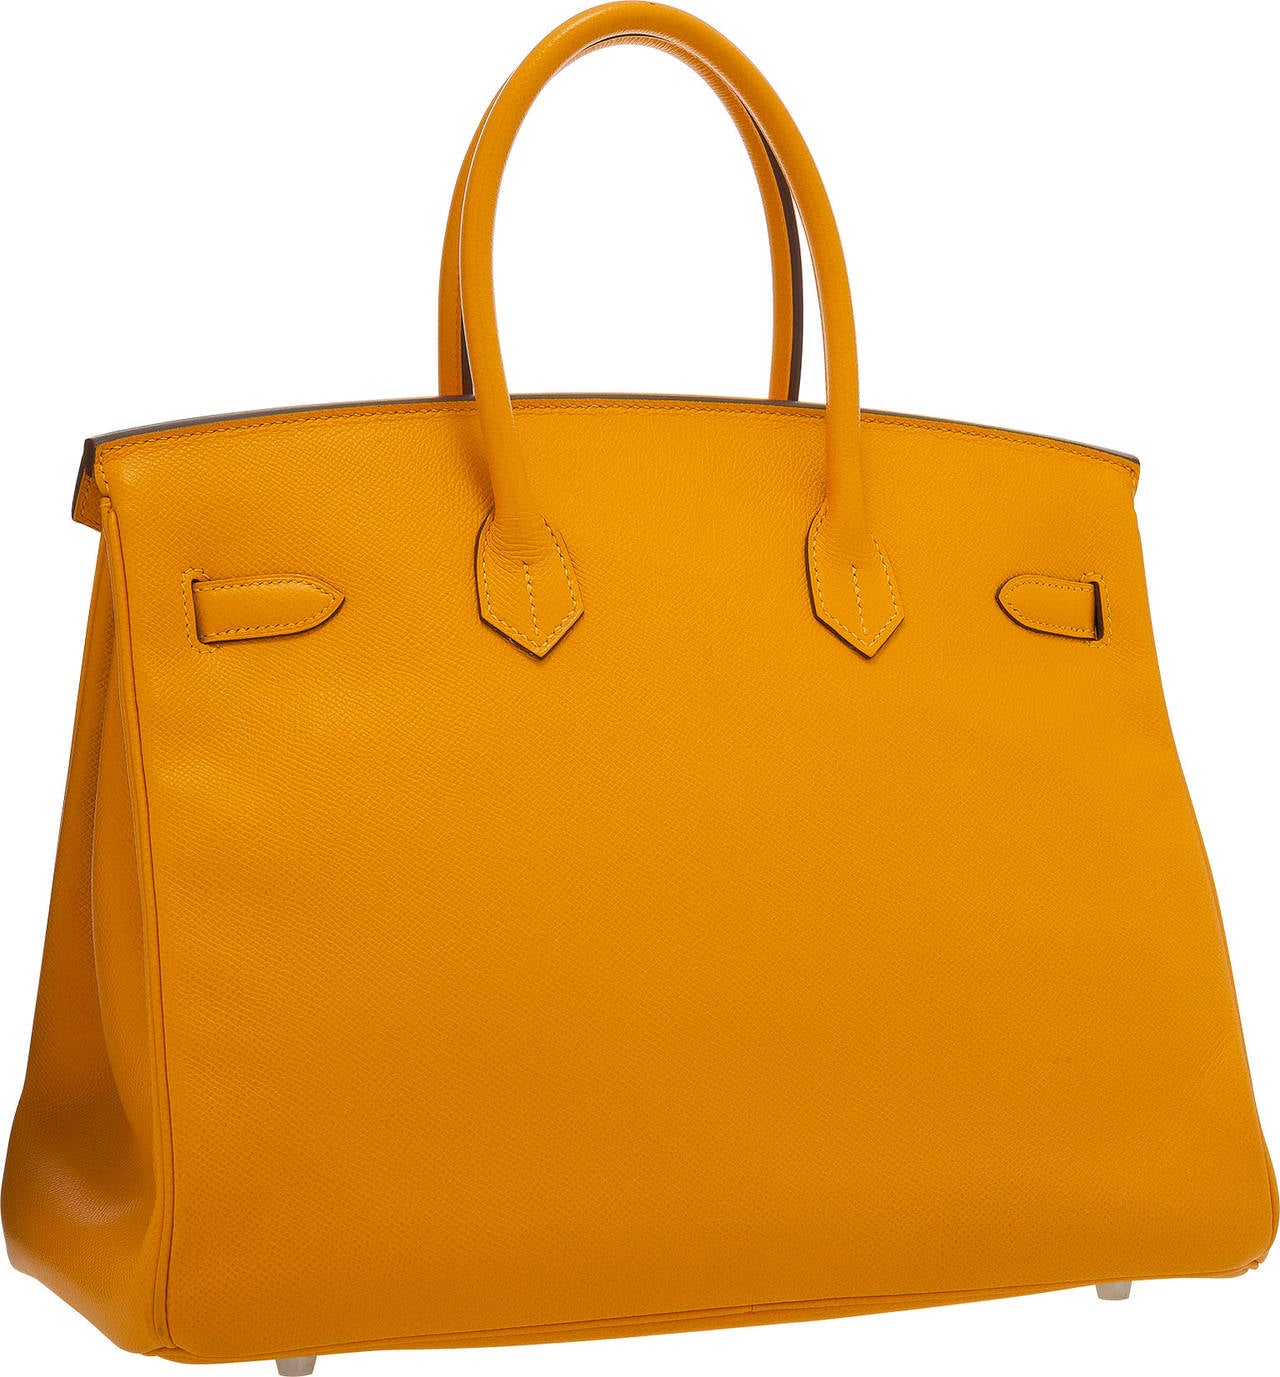 Hermes 35cm Jaune d' Or Epsom Leather Birkin Bag with Palladium Hardware In Excellent Condition For Sale In New York, NY